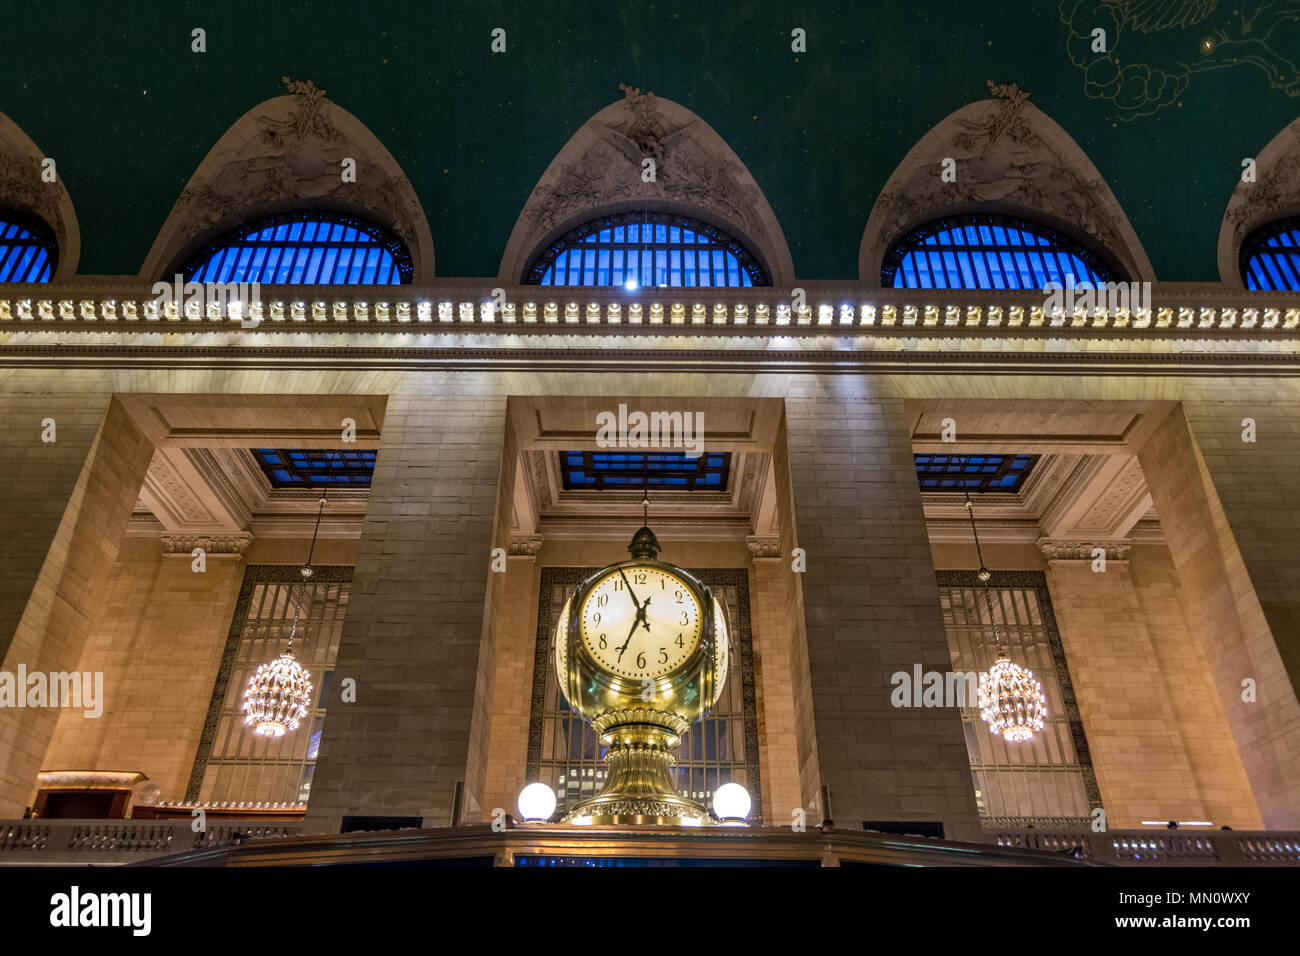 New York, US - March 28, 2018:  The famous clock in the main hall of at the iconic Central Station in New York Stock Photo